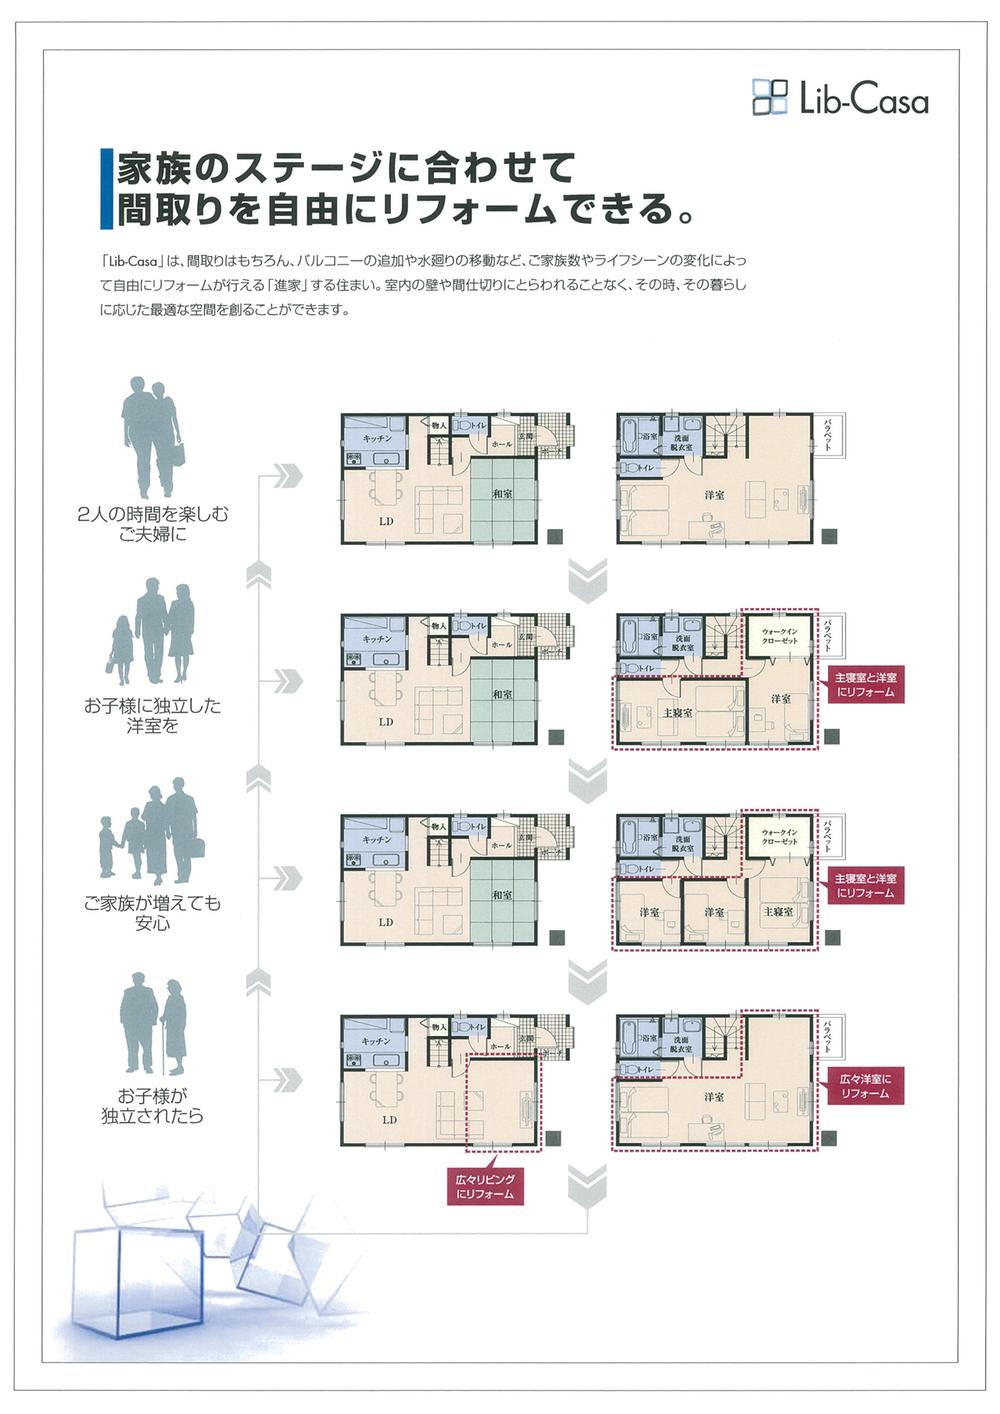 Construction ・ Construction method ・ specification. You are free to reform the floor plan.